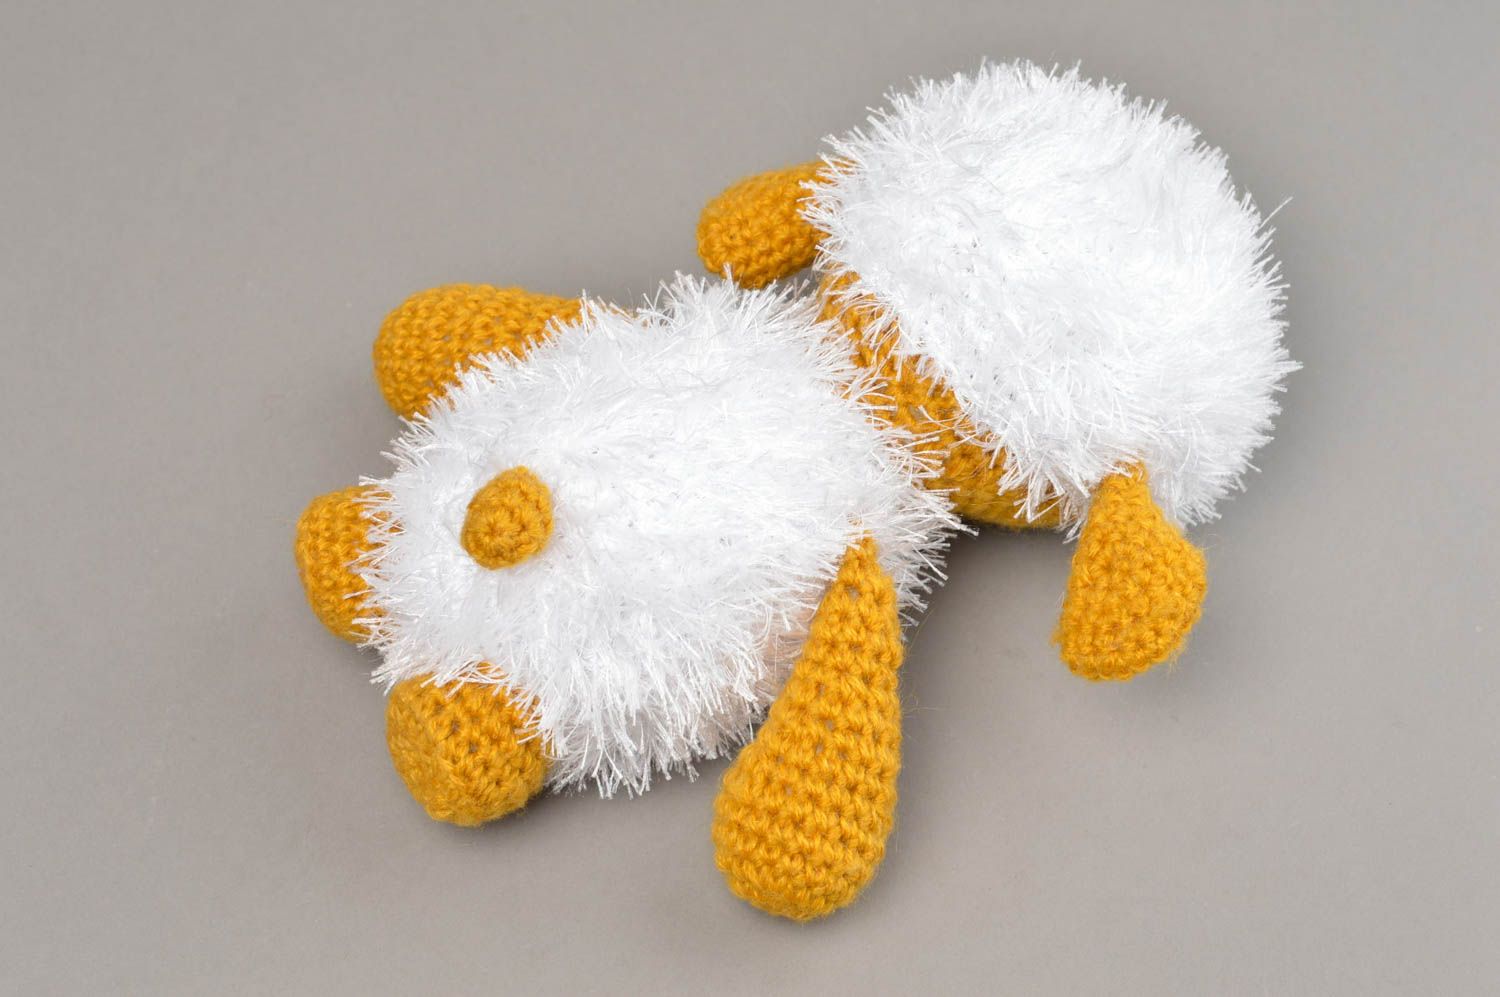 Handmade designer soft toy unusual white sheep toy cute woven souvenirs photo 3